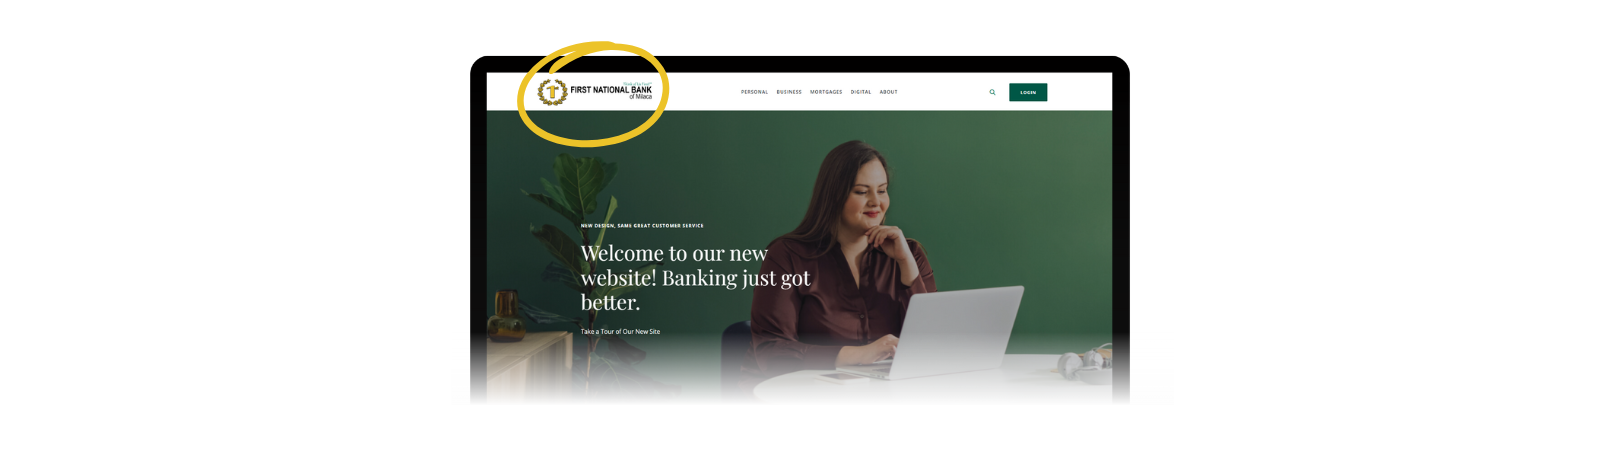 Back to Home
Wherever you find yourself on the site, click the First National Bank of Milaca logo to go back to the homepage.